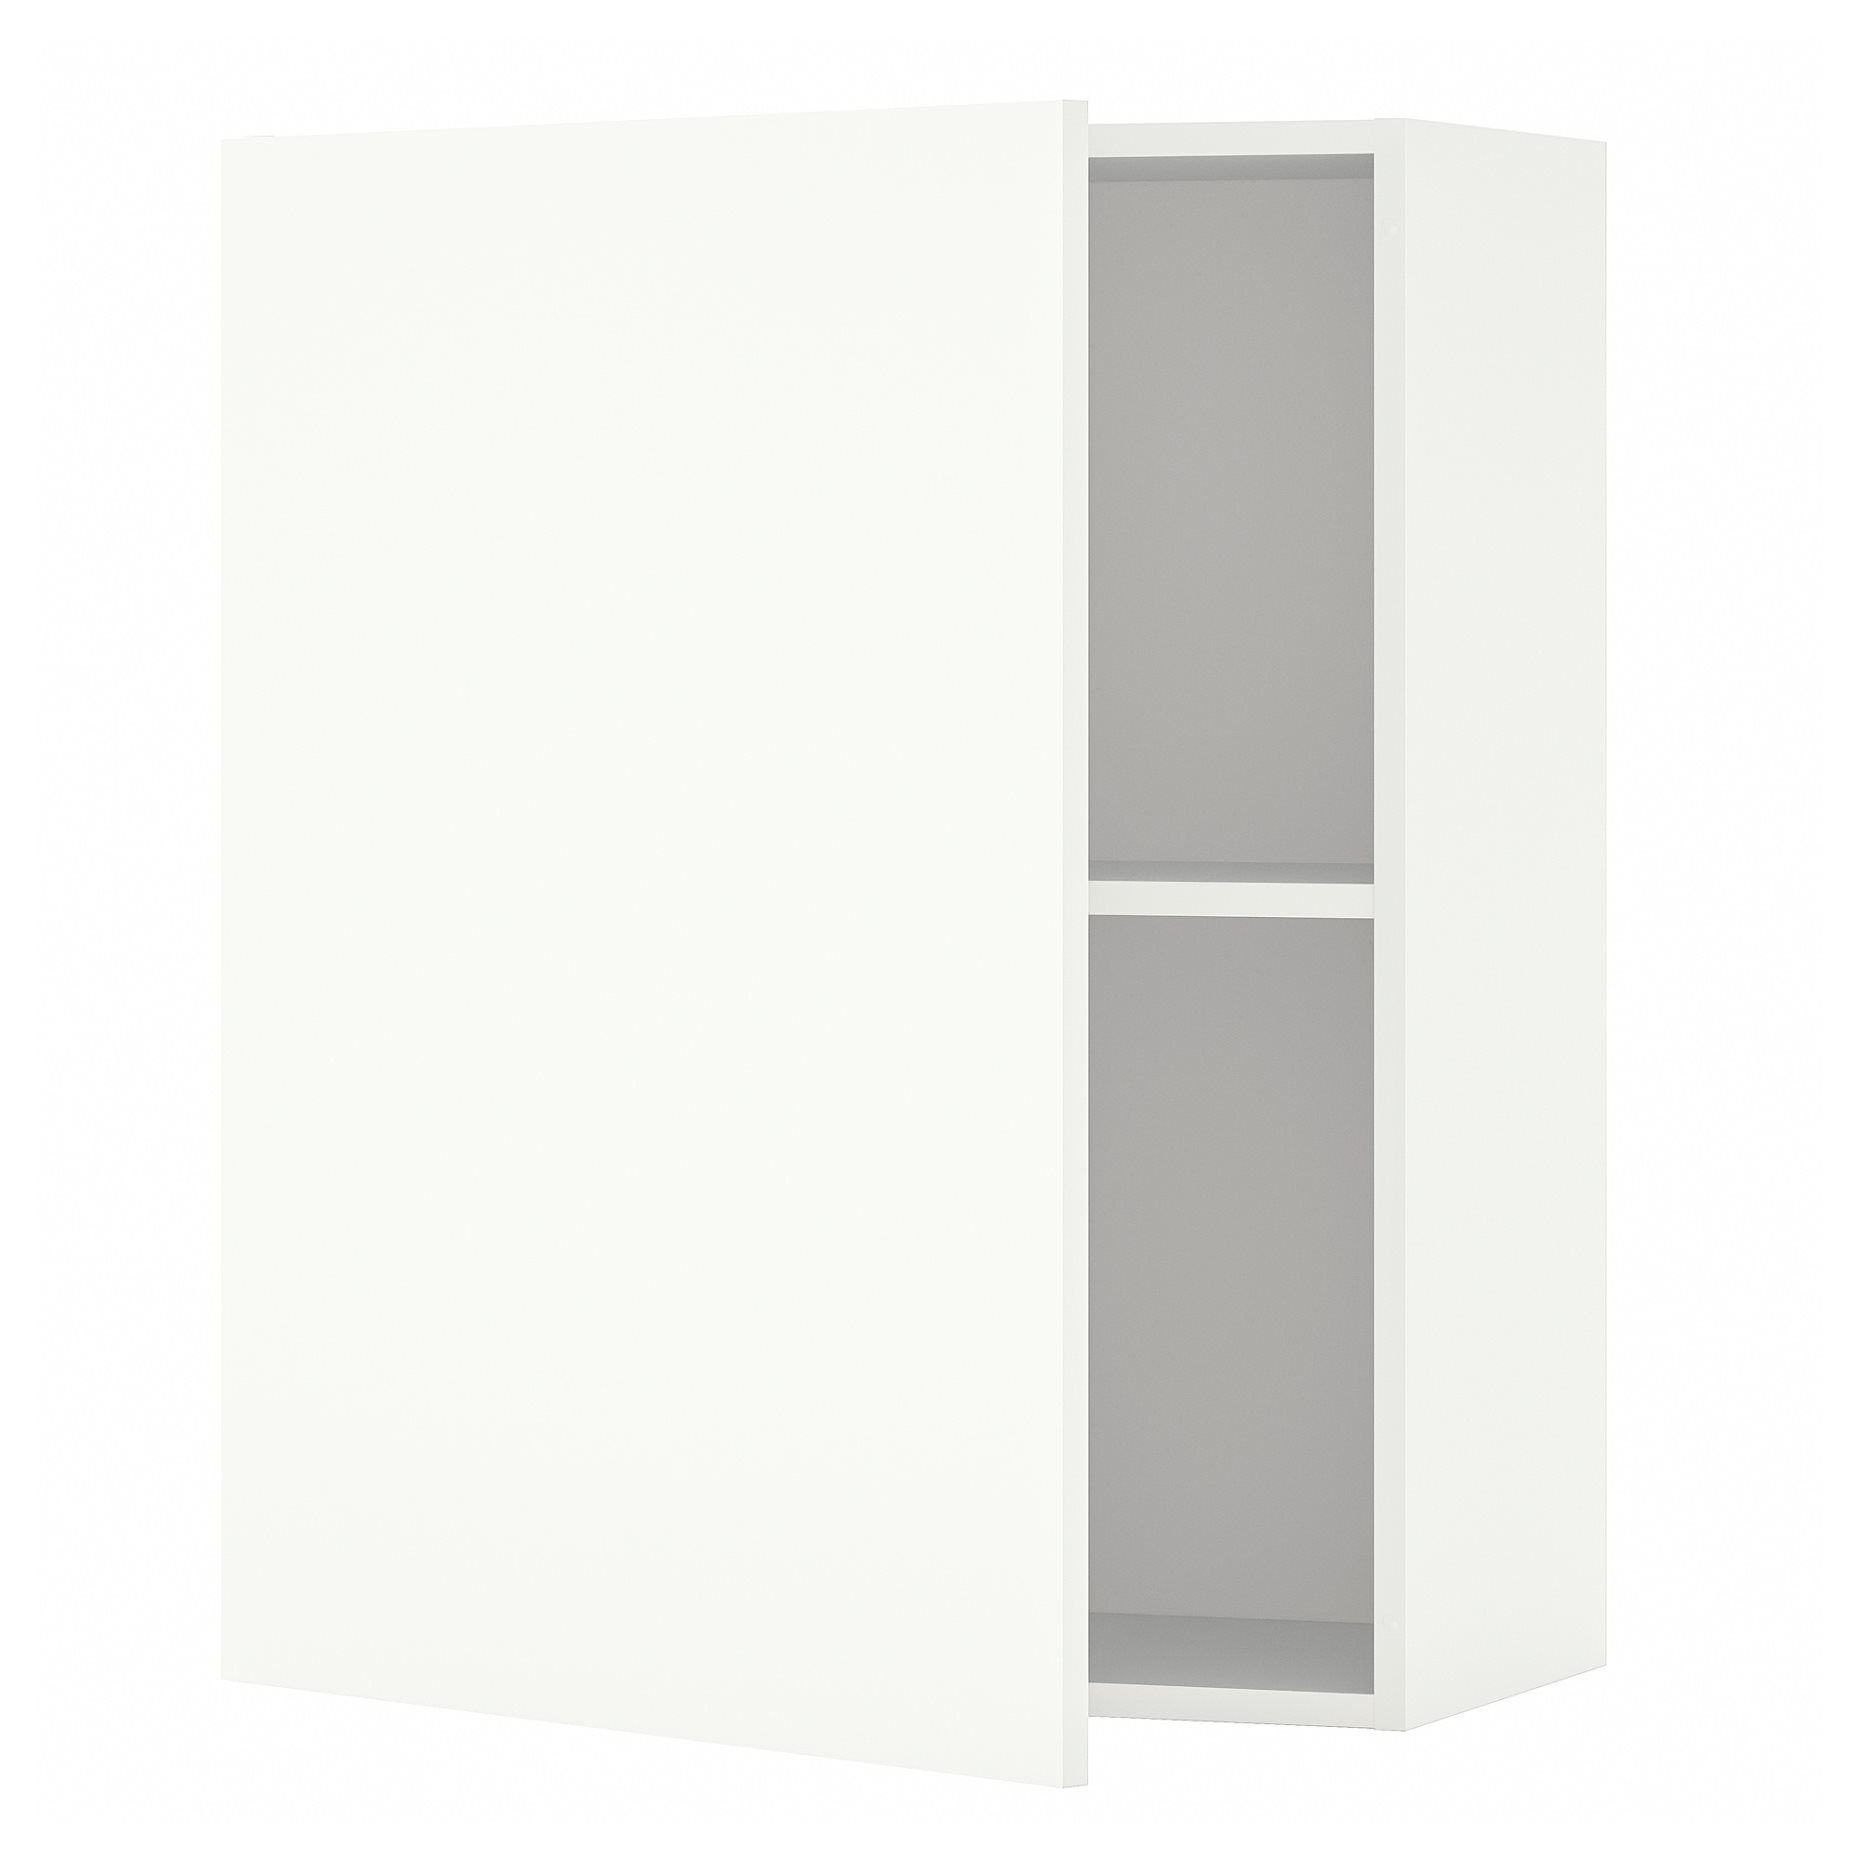 KNOXHULT, wall cabinet with door, 60x75 cm, 404.963.10